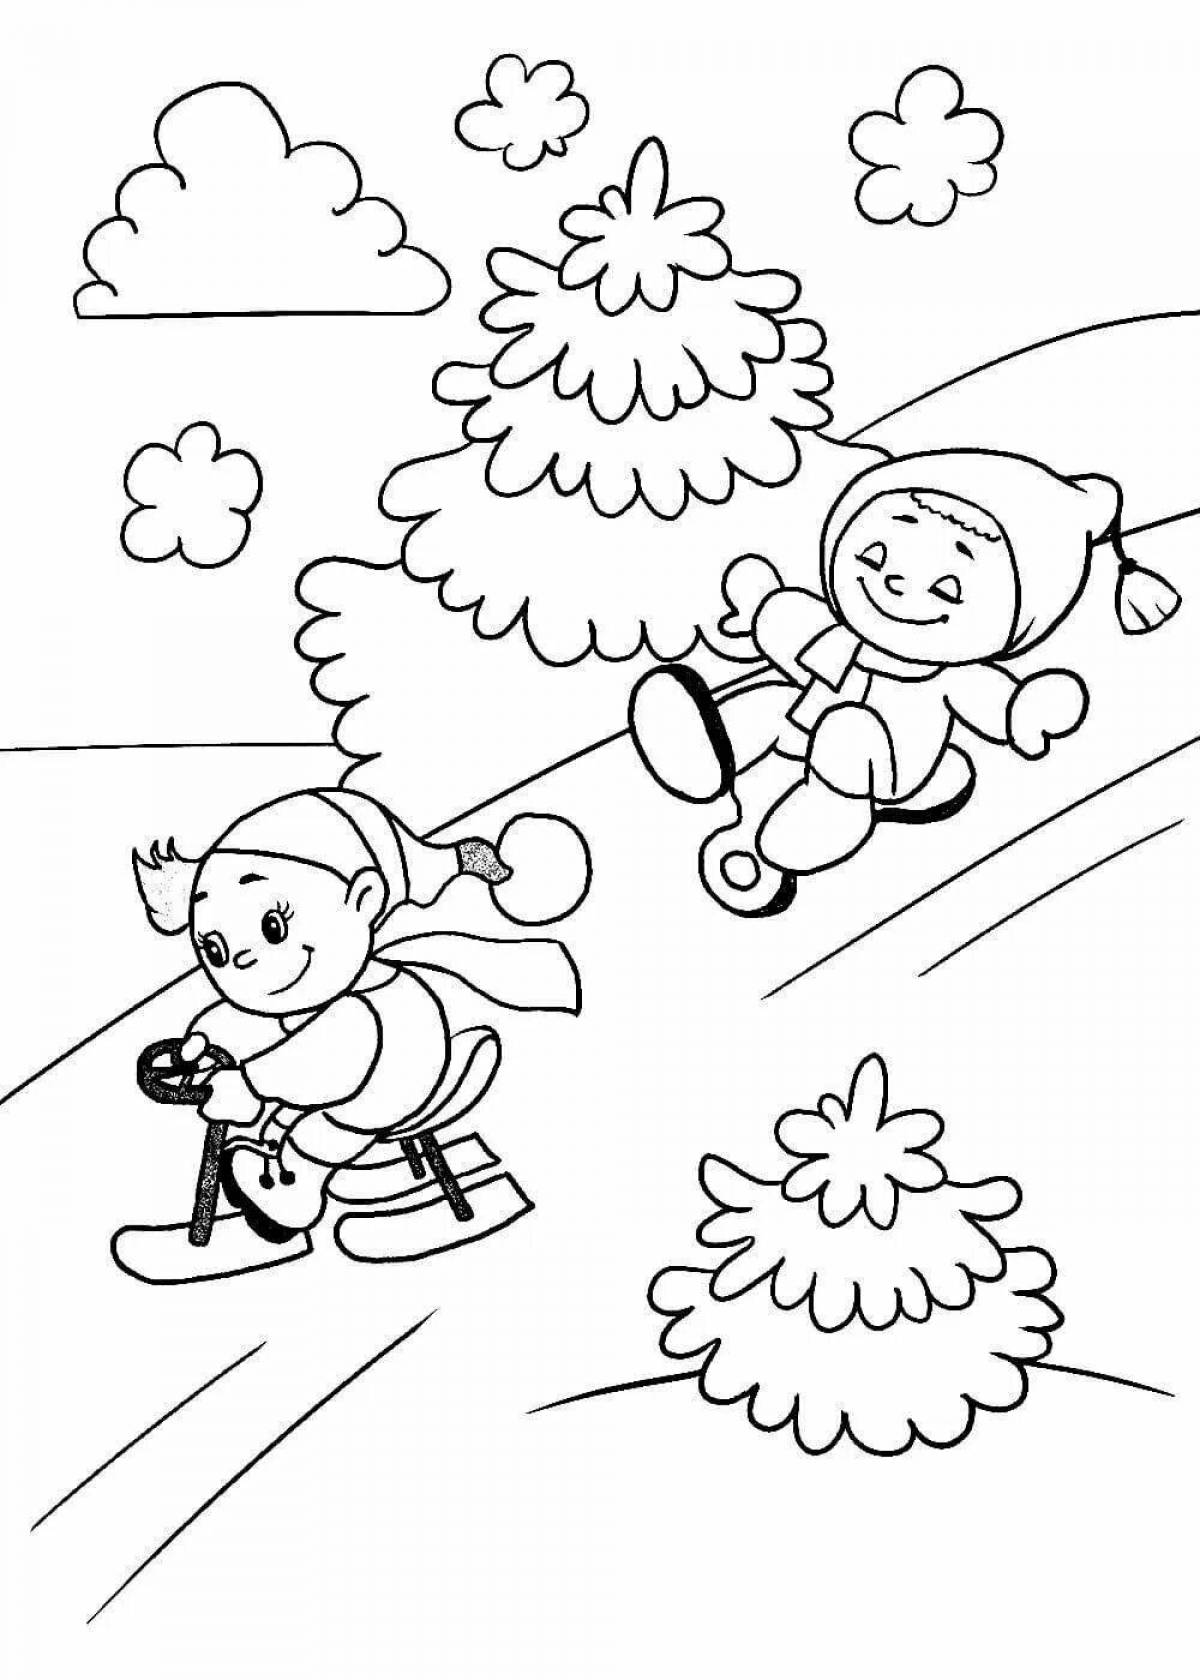 Animated winter safety coloring page